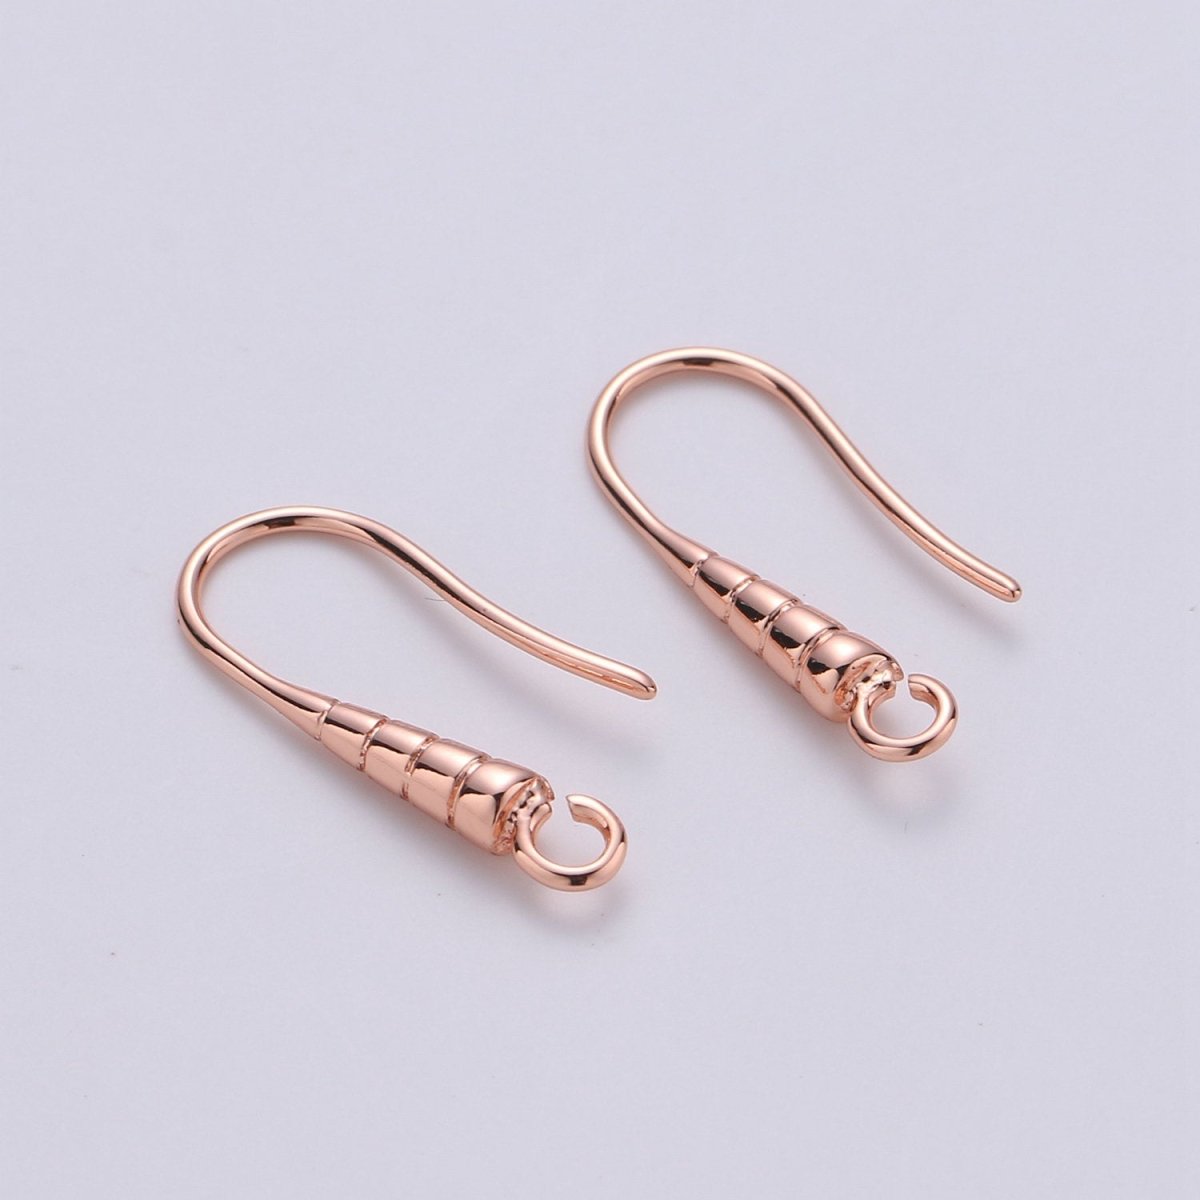 20mm Line Textured French Hook Earrings Open Loop Supply in Gold, Silver, Rose Gold K-687 - K-689 - DLUXCA